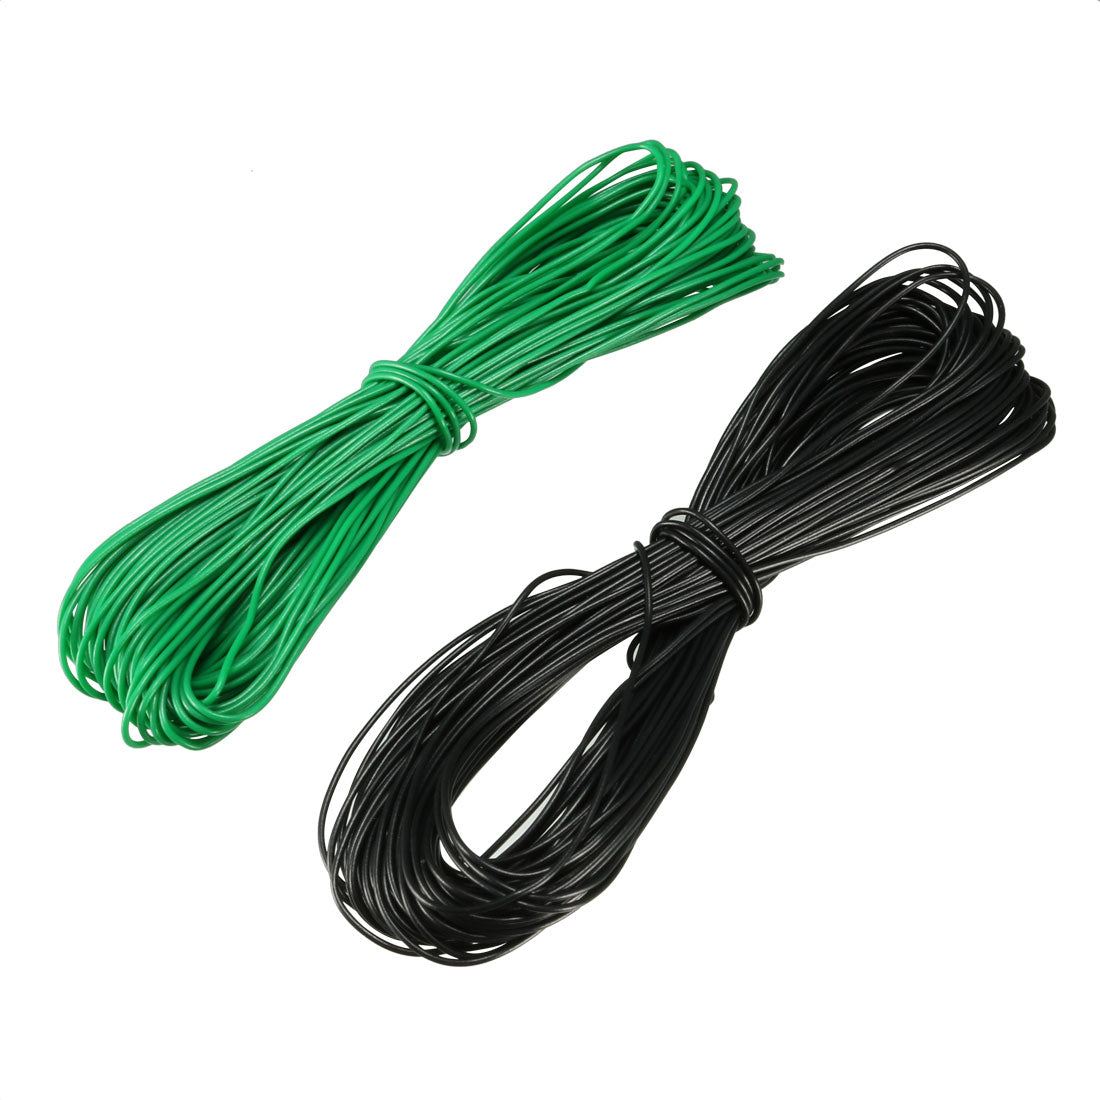 uxcell Uxcell 2Pcs Wrapping Wire Tin Plated Copper Wire P/N 30 AWG 10M Length Black Green